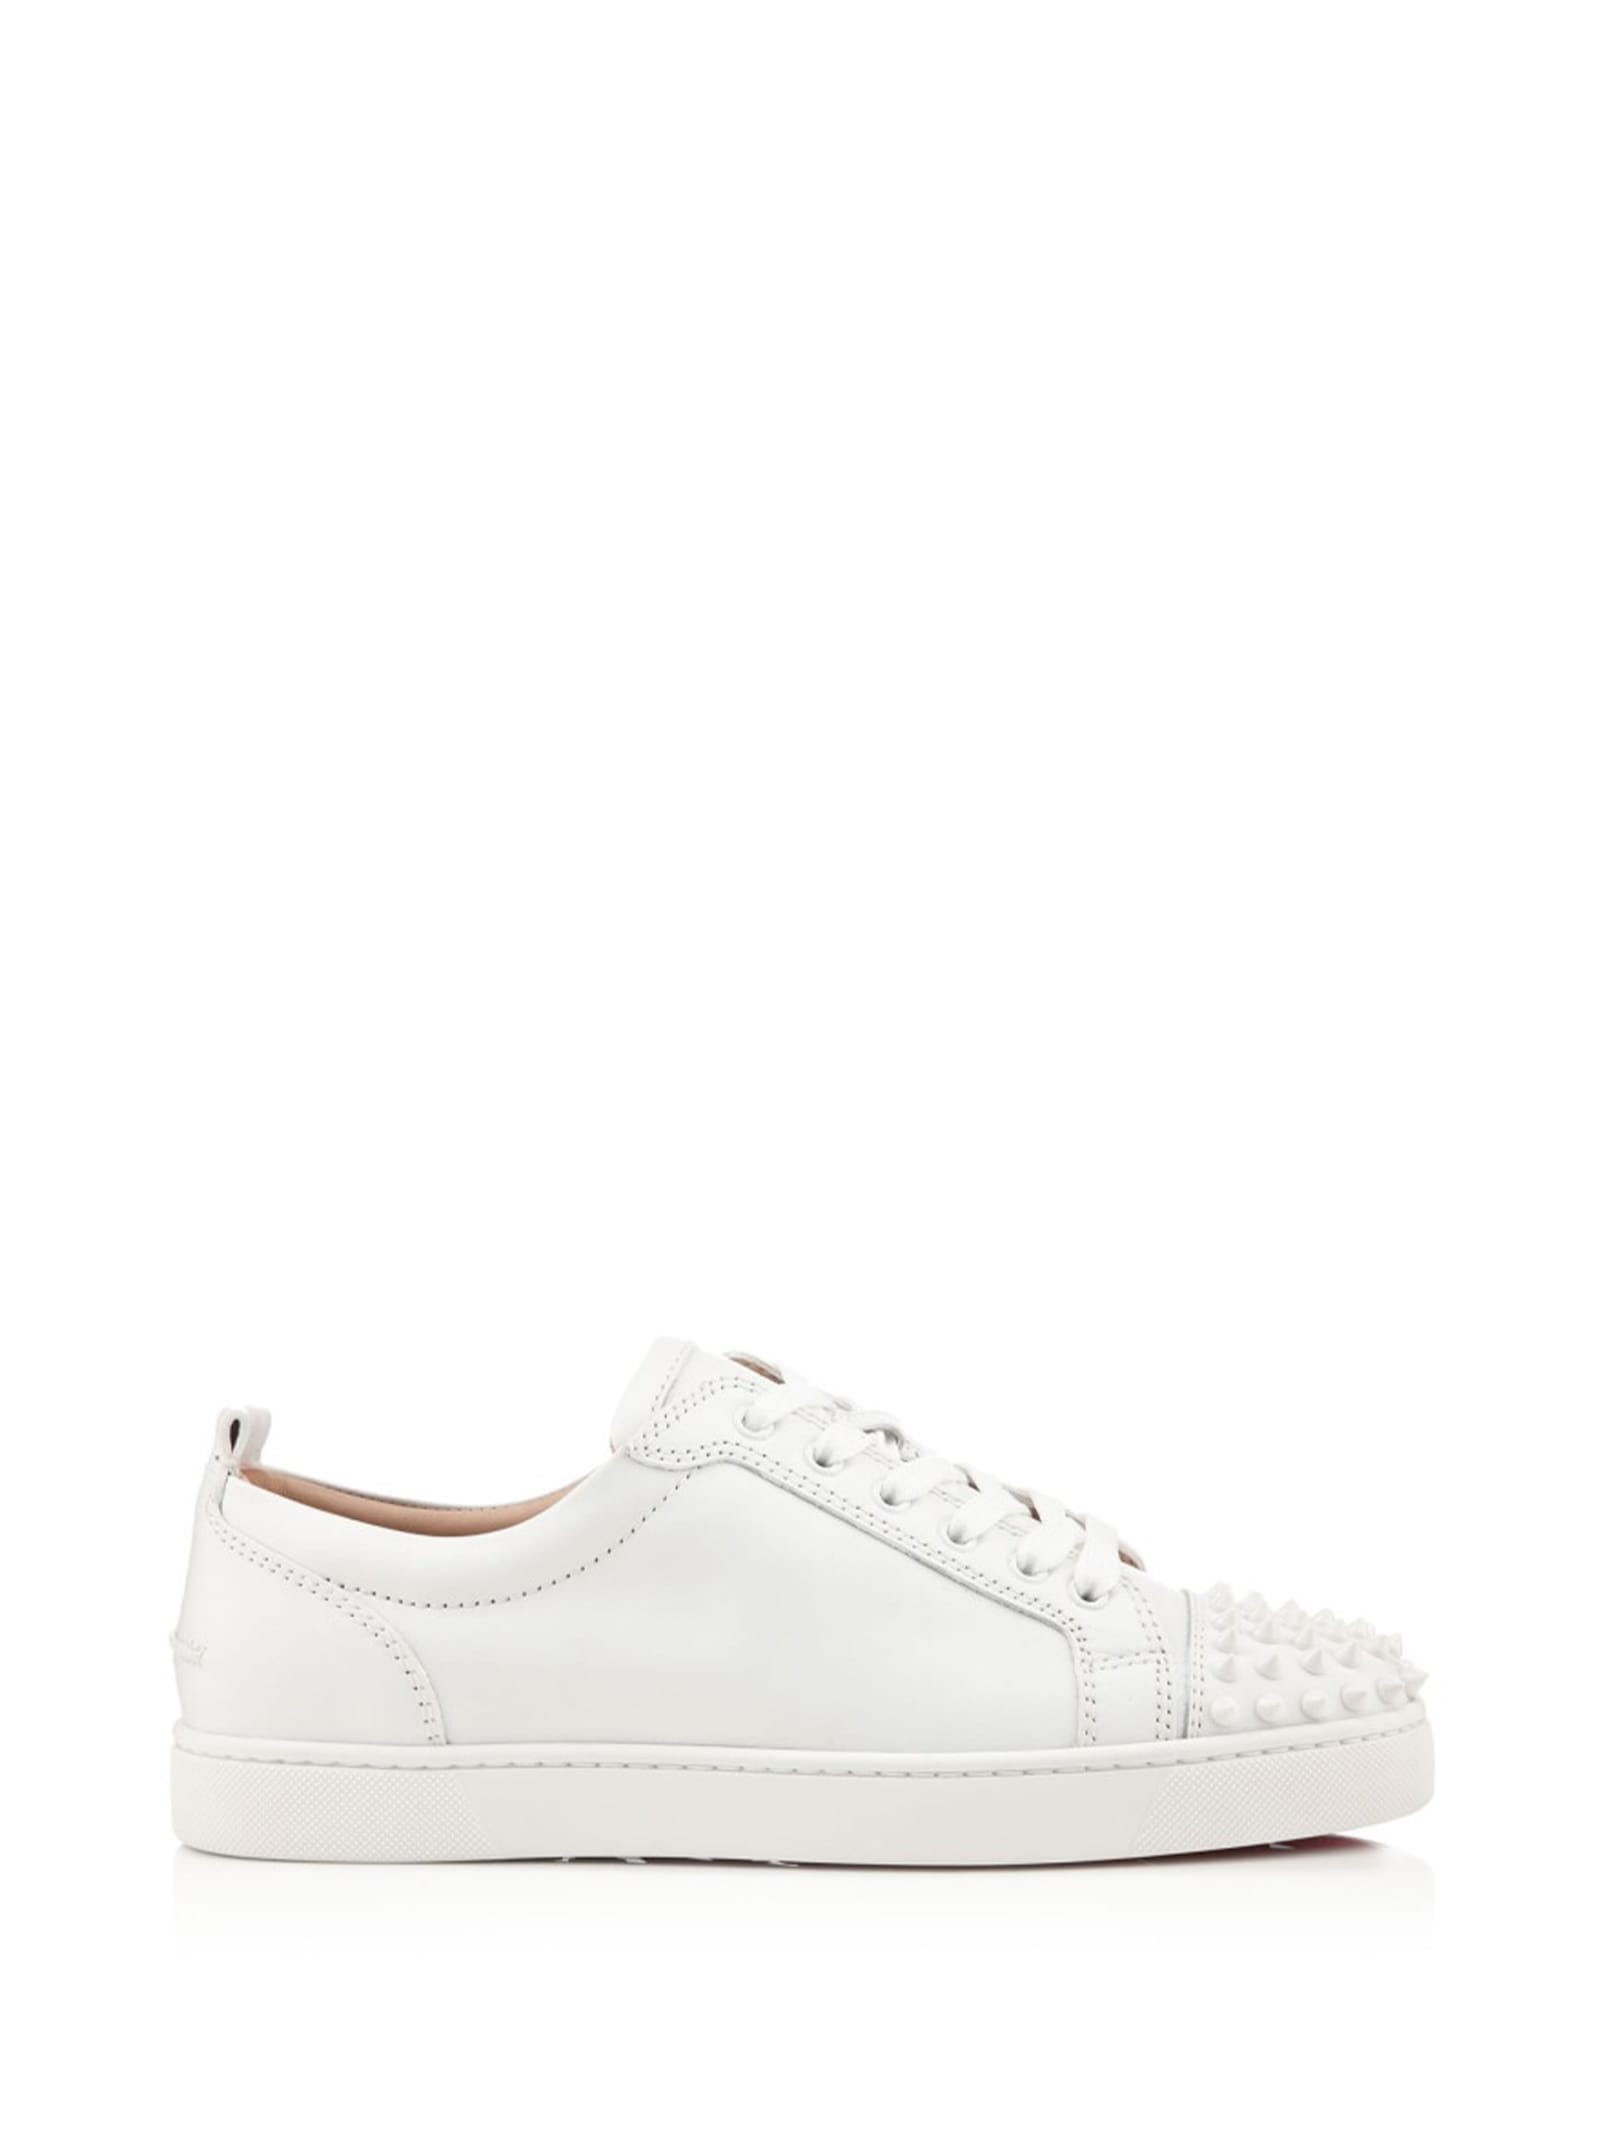 Shop Christian Louboutin Louis Sneakers With Spikes In White White